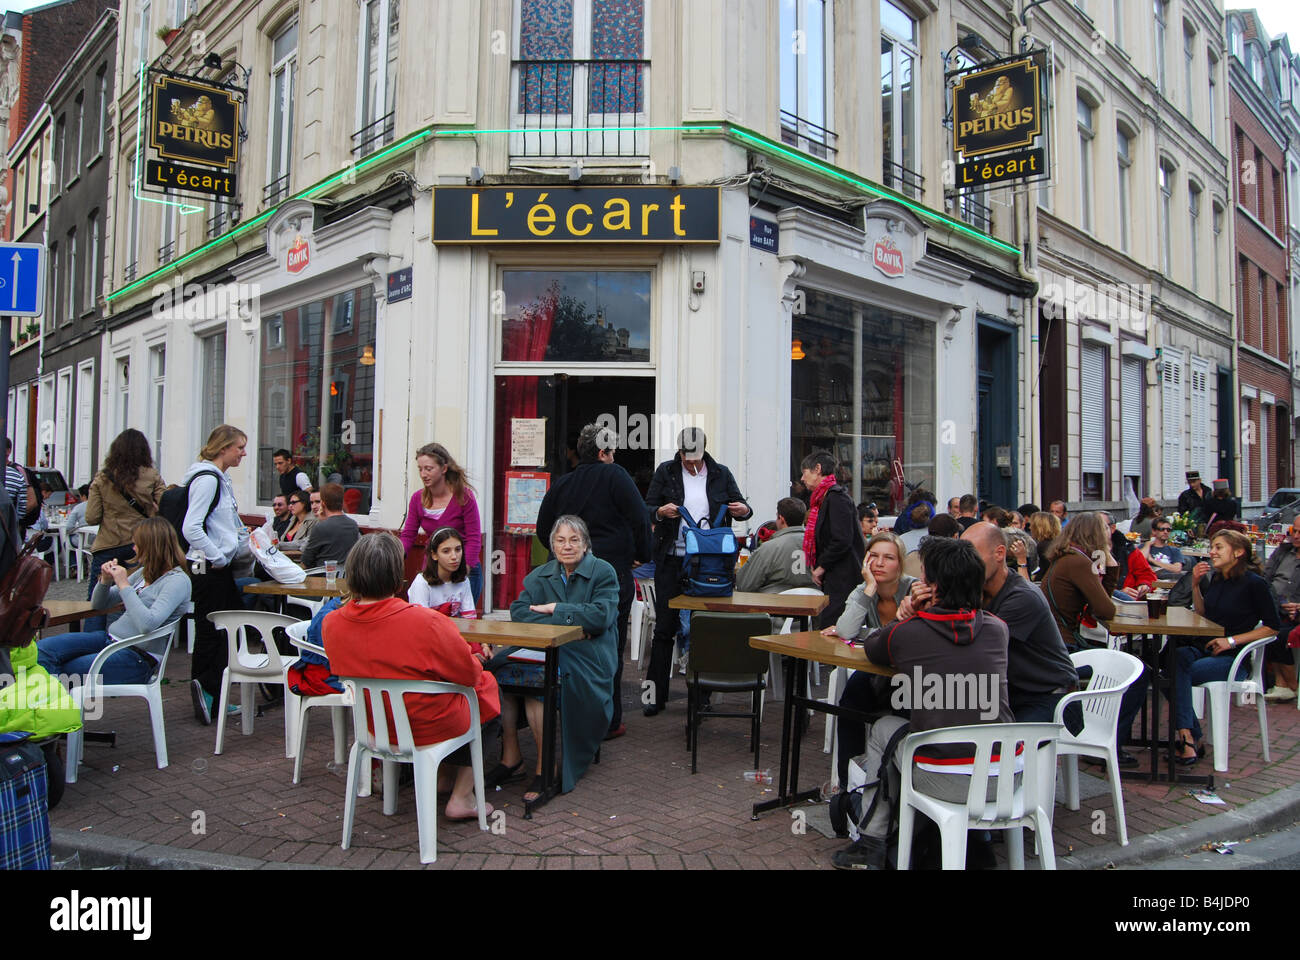 having a break at a cafe l'écart at Lille Braderie France Stock Photo